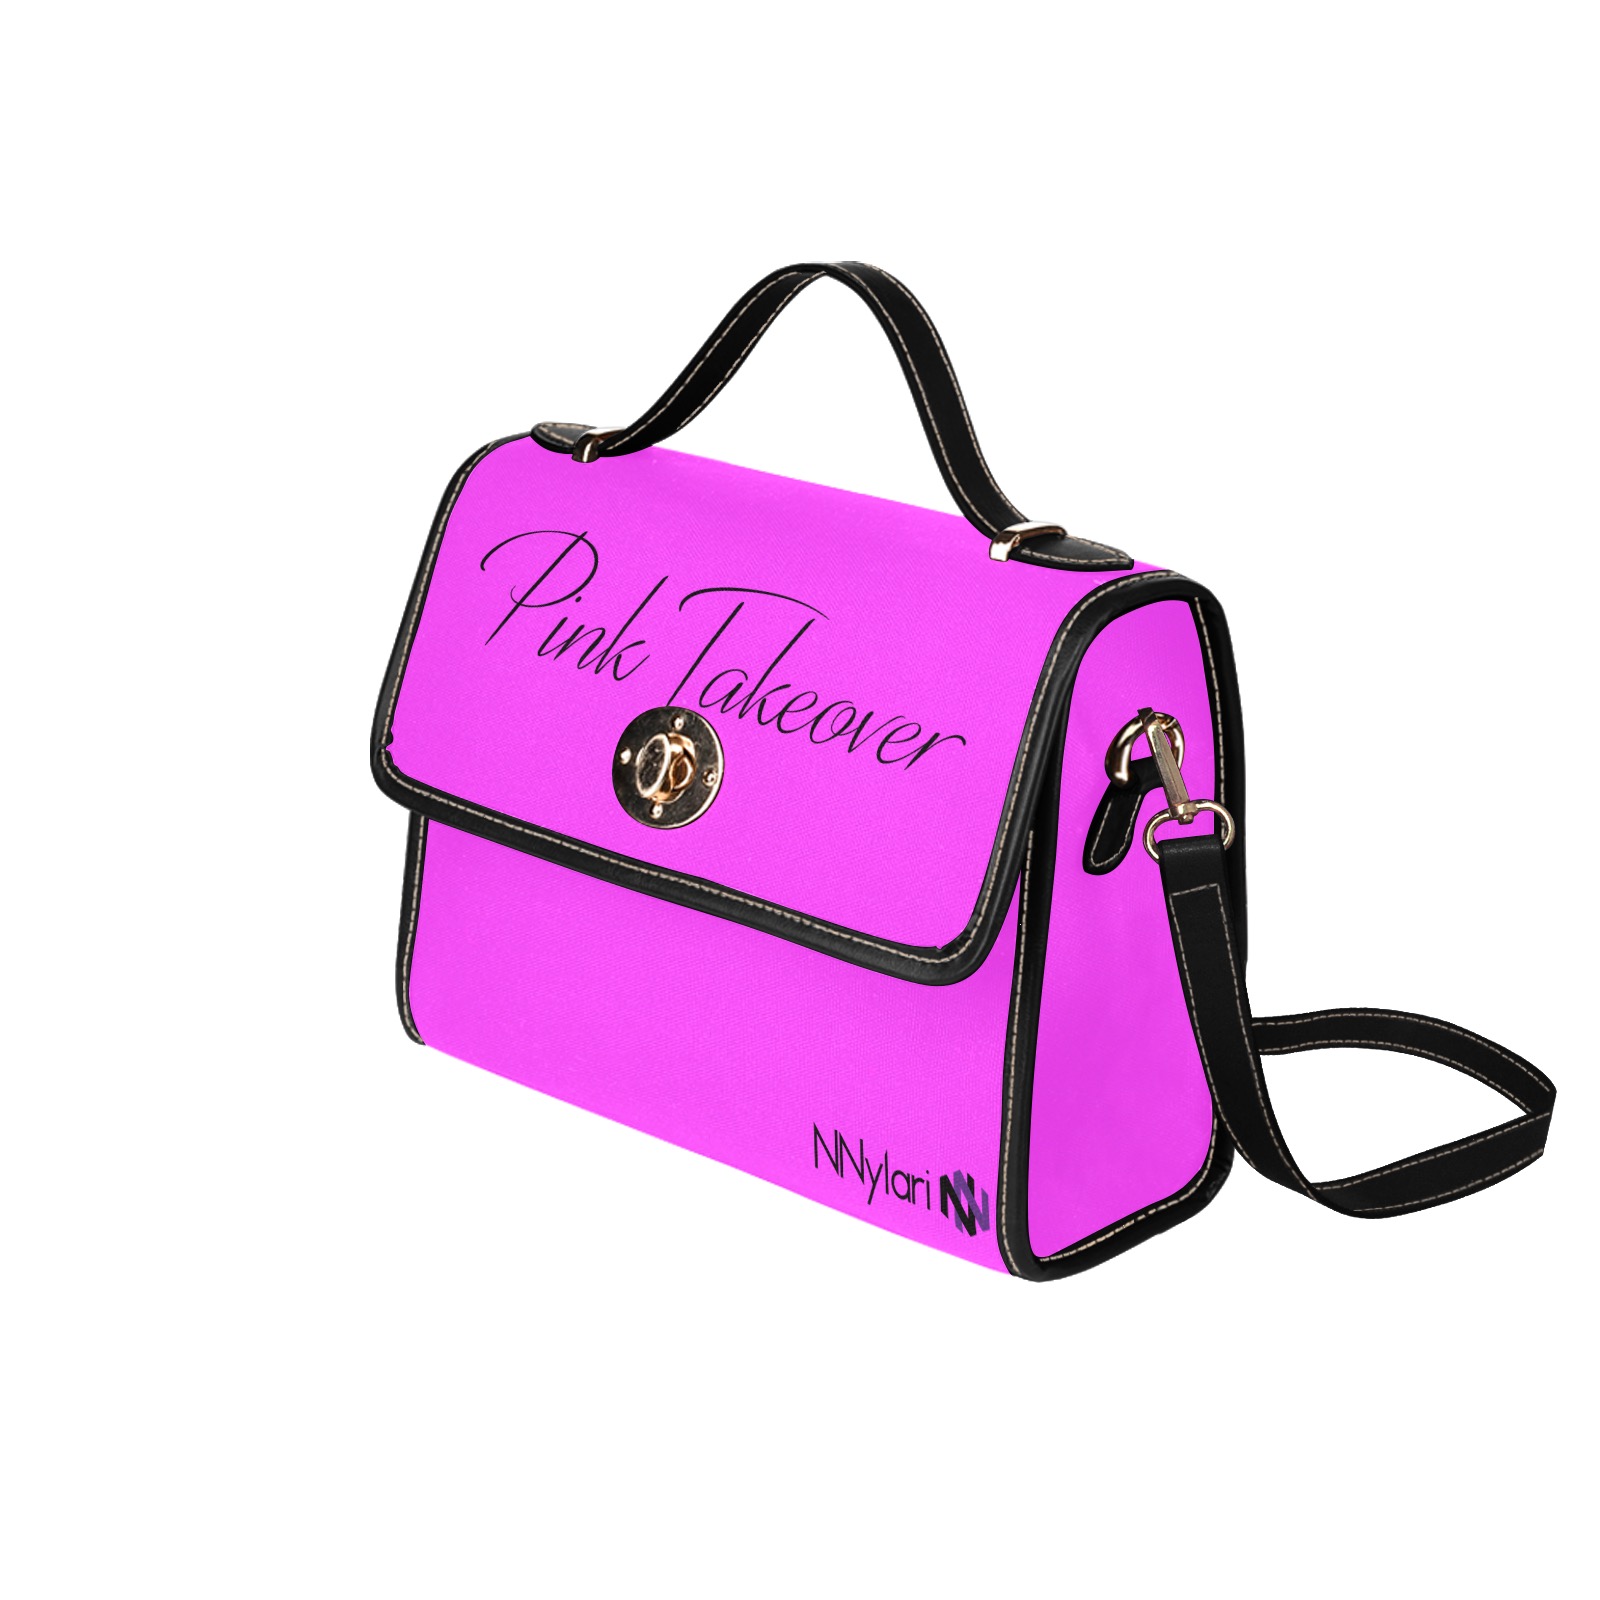 PinkTakeover Purse Waterproof Canvas Bag-Black (All Over Print) (Model 1641)